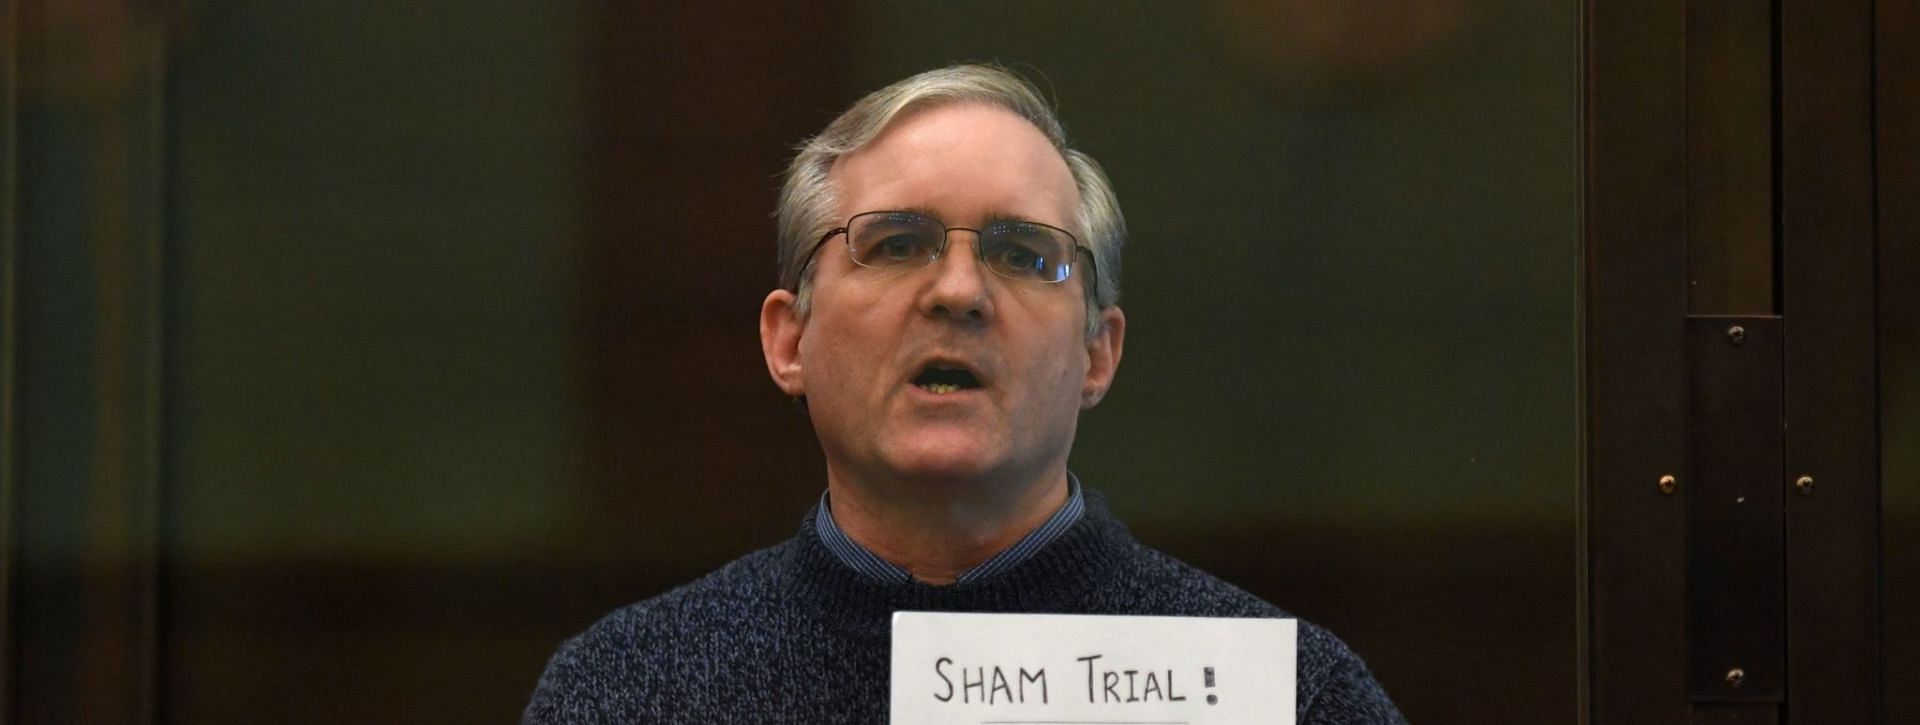 Calls for Paul Whelan&#039;s release sparked debate on social media (Image via Getty Images)